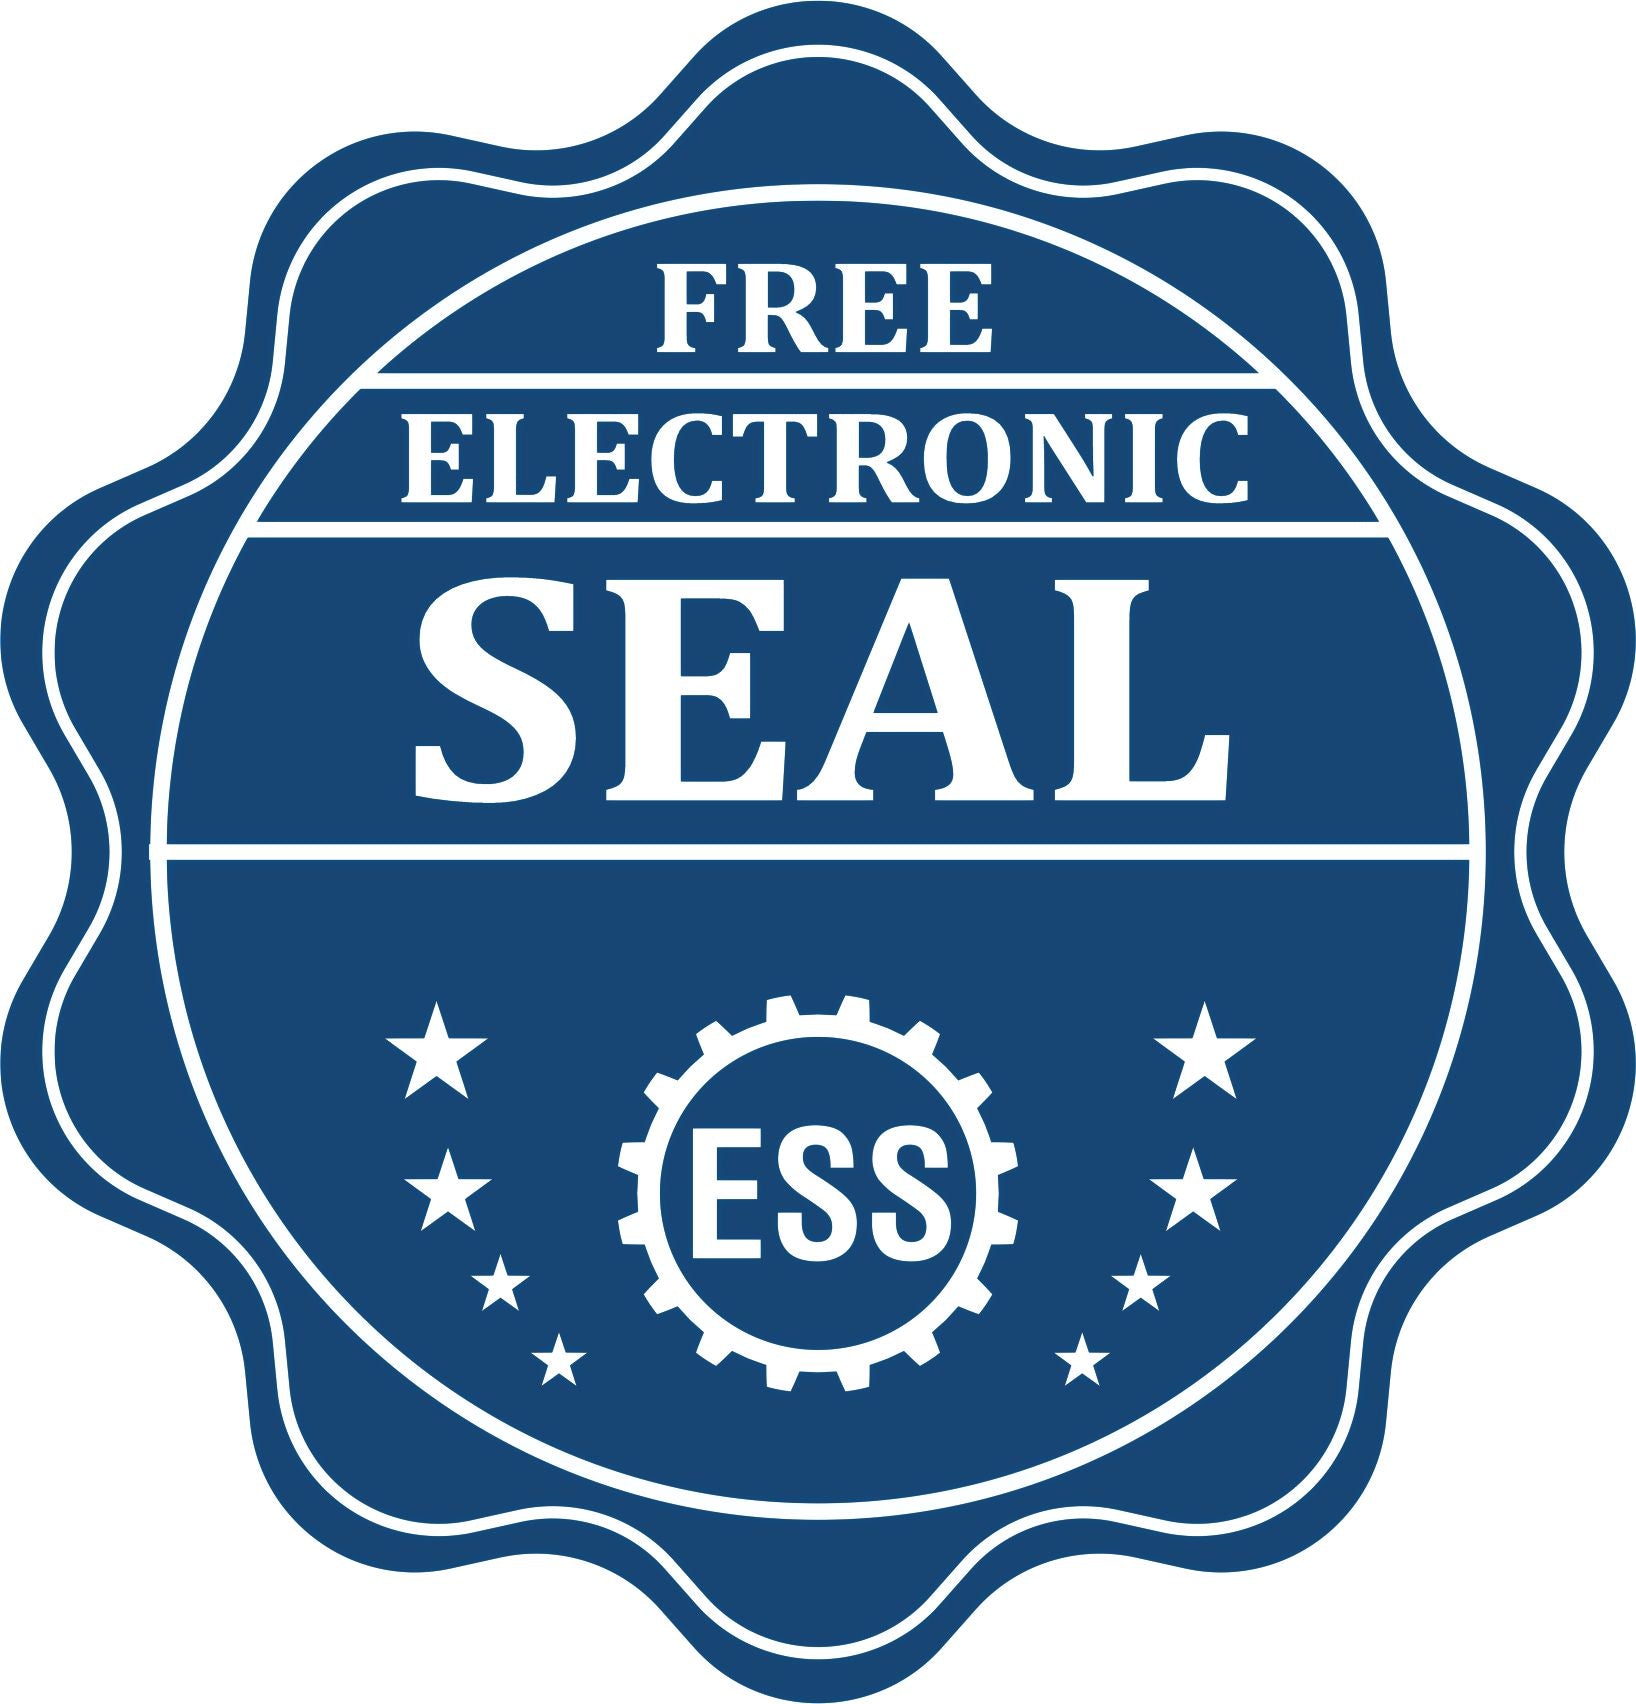 A badge showing a free electronic seal for the Heavy Duty Cast Iron Mississippi Land Surveyor Seal Embosser with stars and the ESS gear on the emblem.